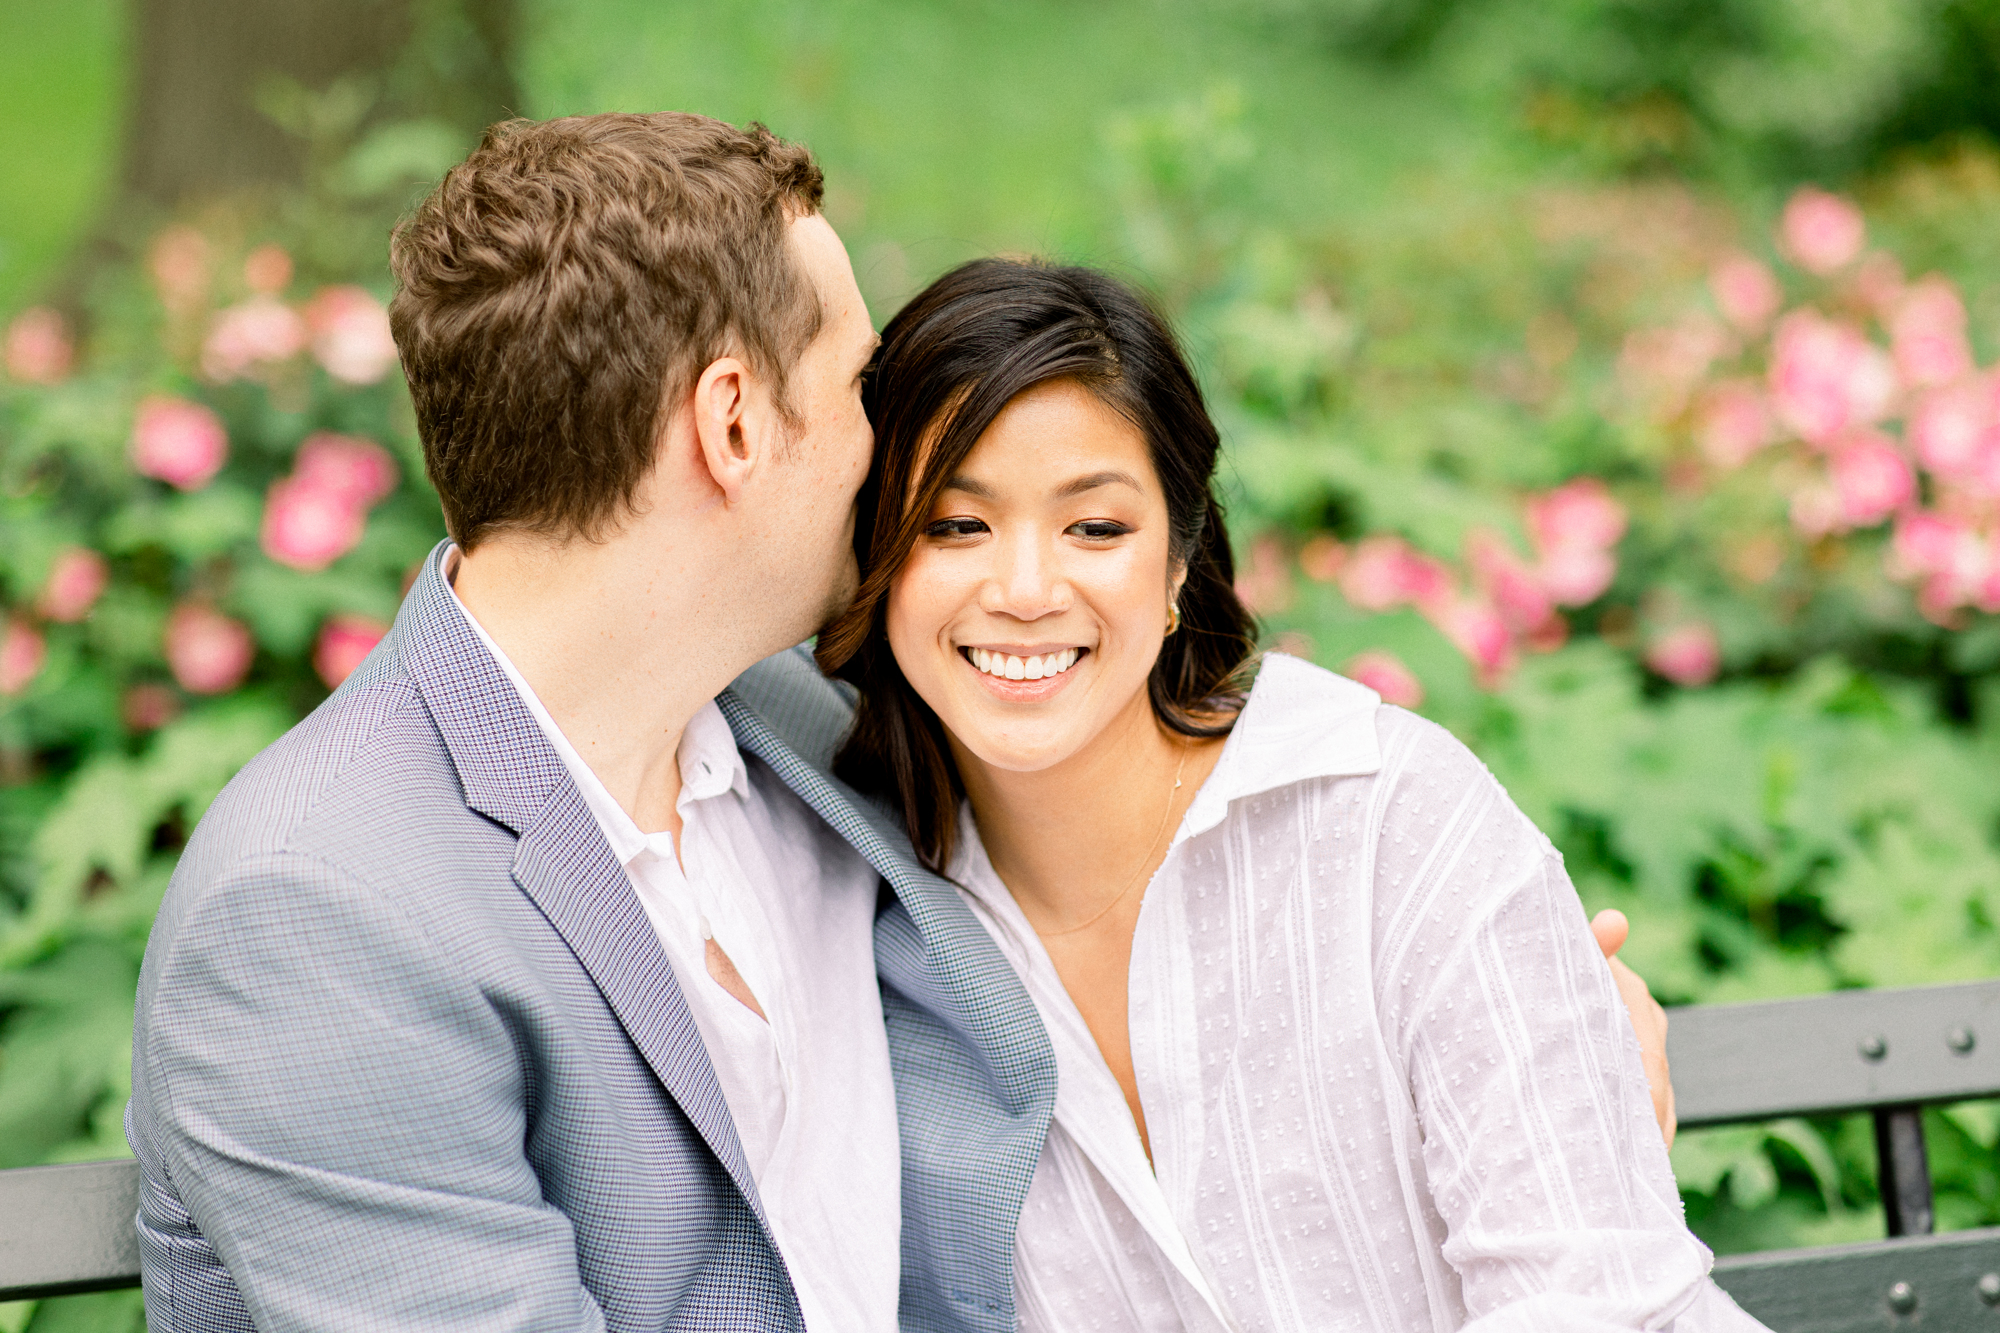 Dreamy Central Park Rowboat Engagement Photography in New York